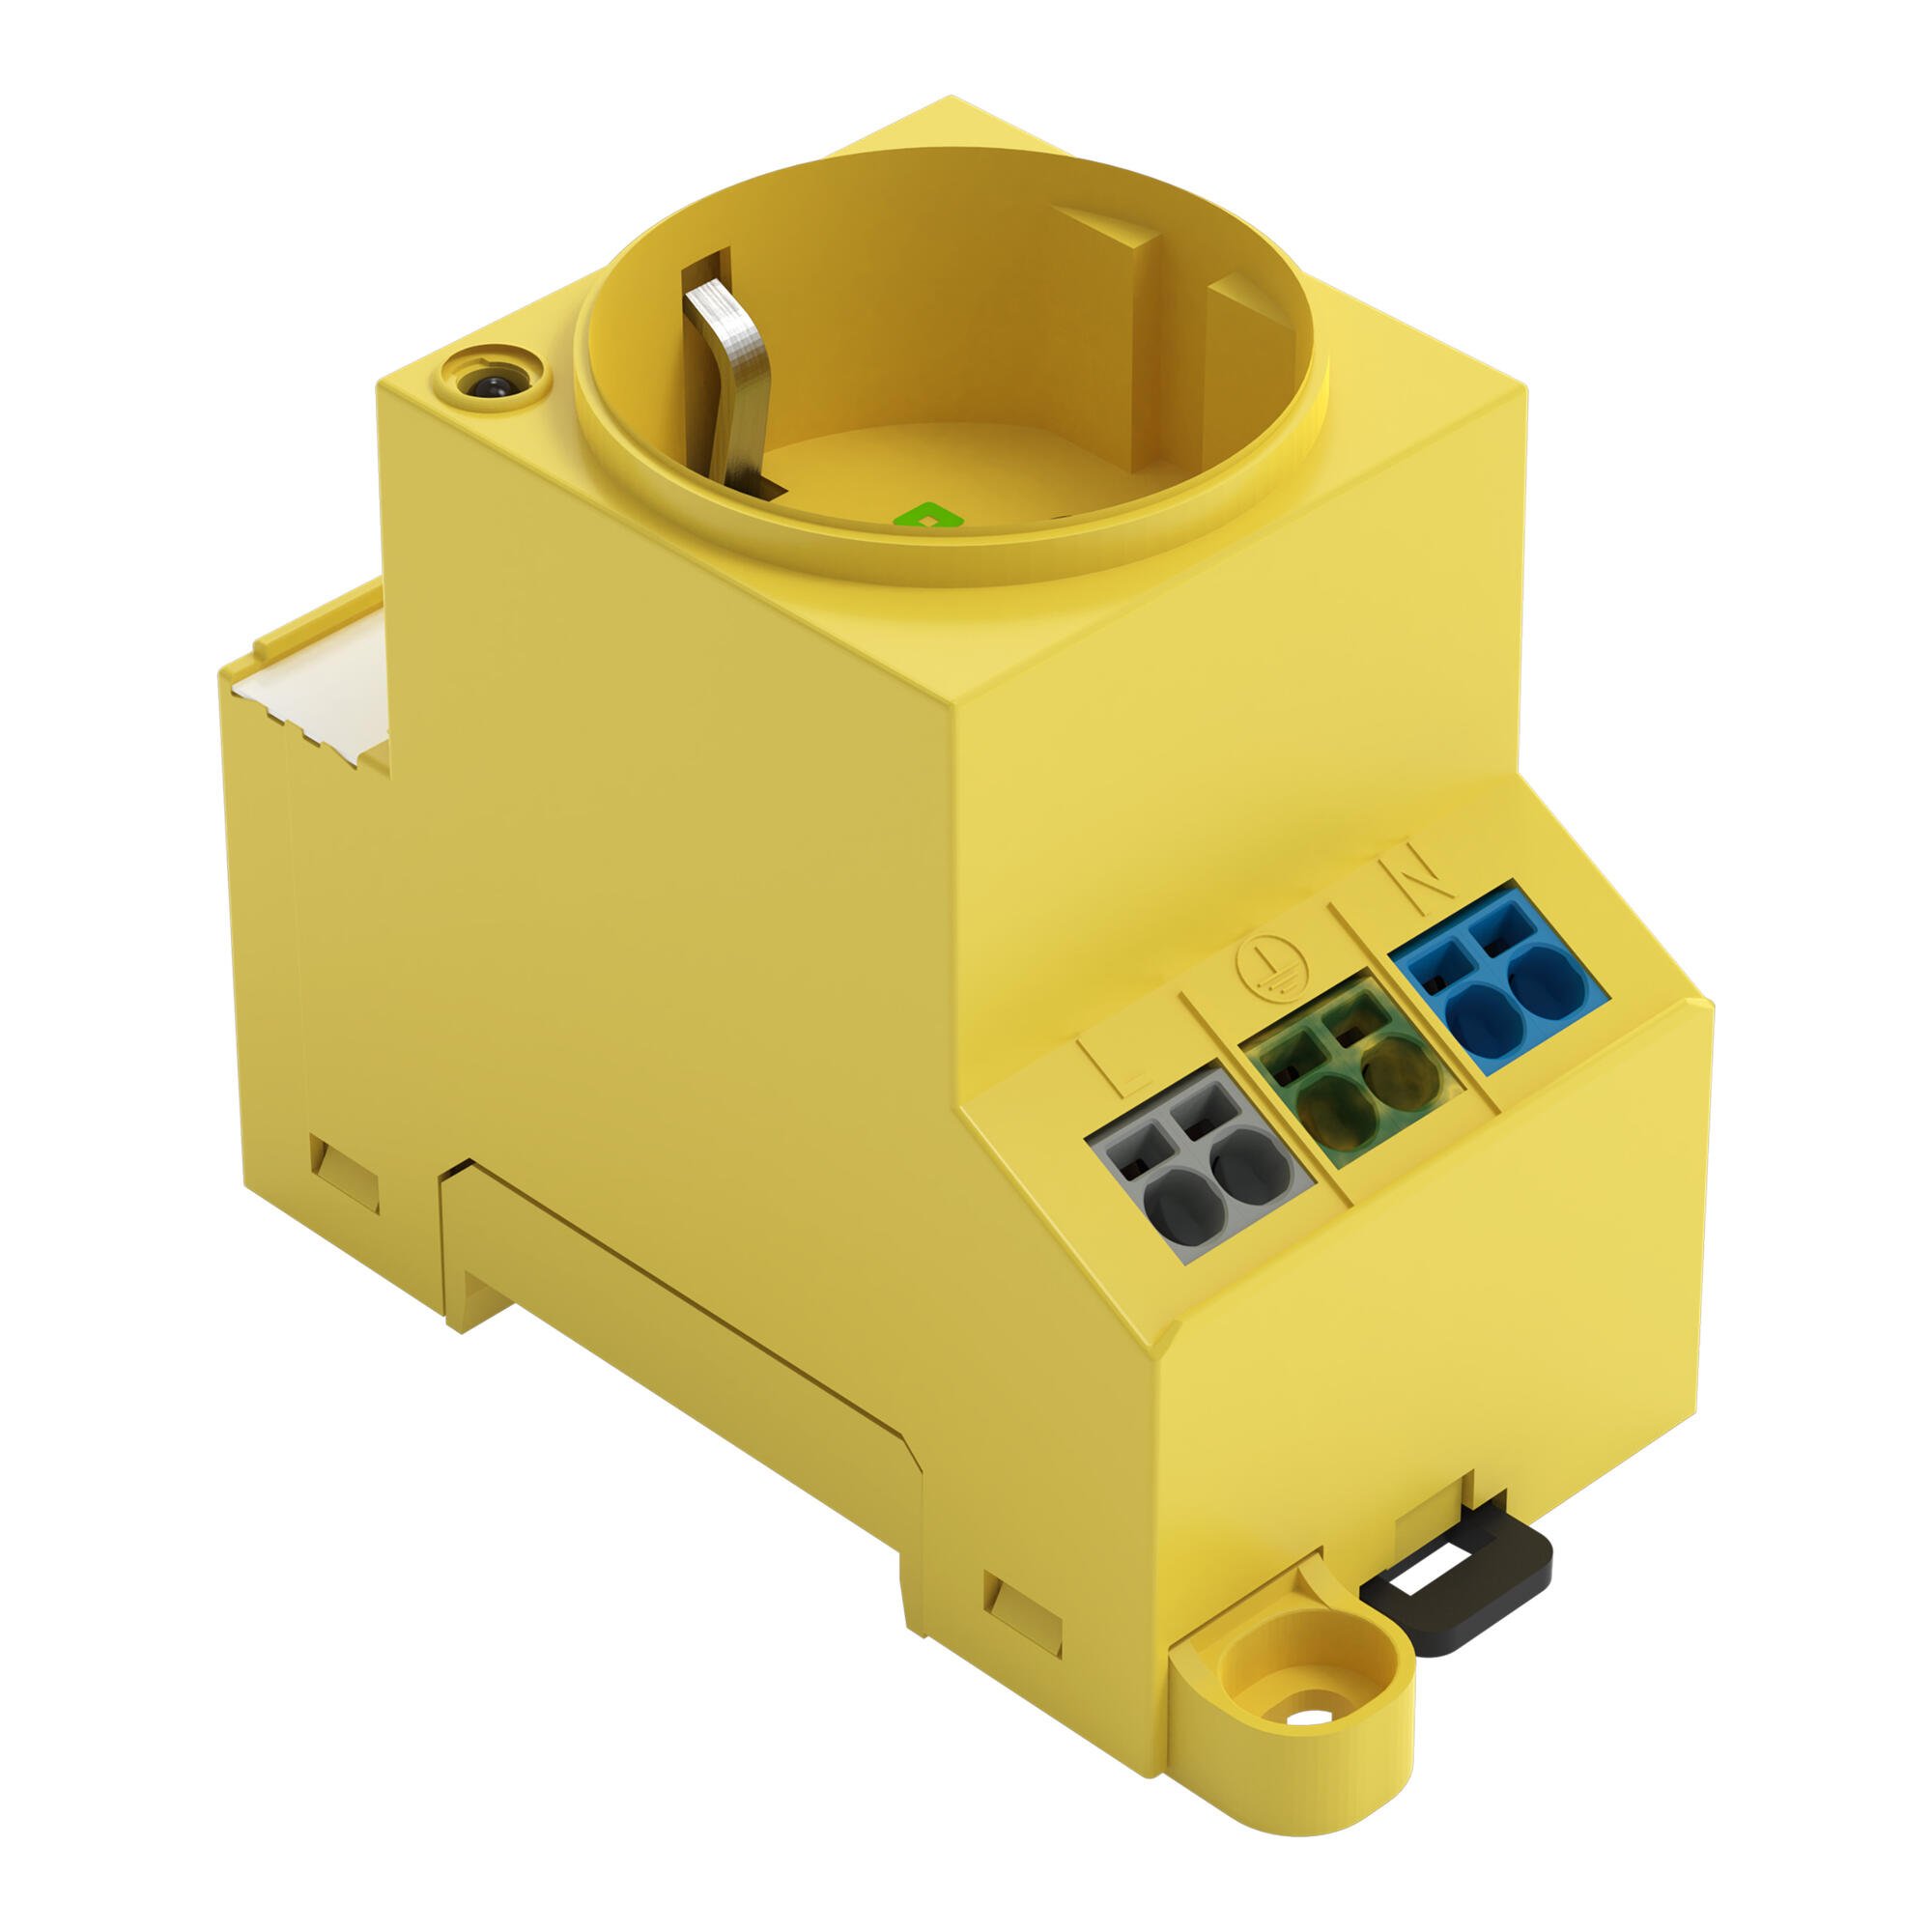 Switchgear cabinet outlet; for DIN-rail and screw mounting; for plug, type F, CEE 7/4 (Schuko); common in DE, NL, AT; with LED status indicator; with Push-in Cage Clamp double connection; signal yellow